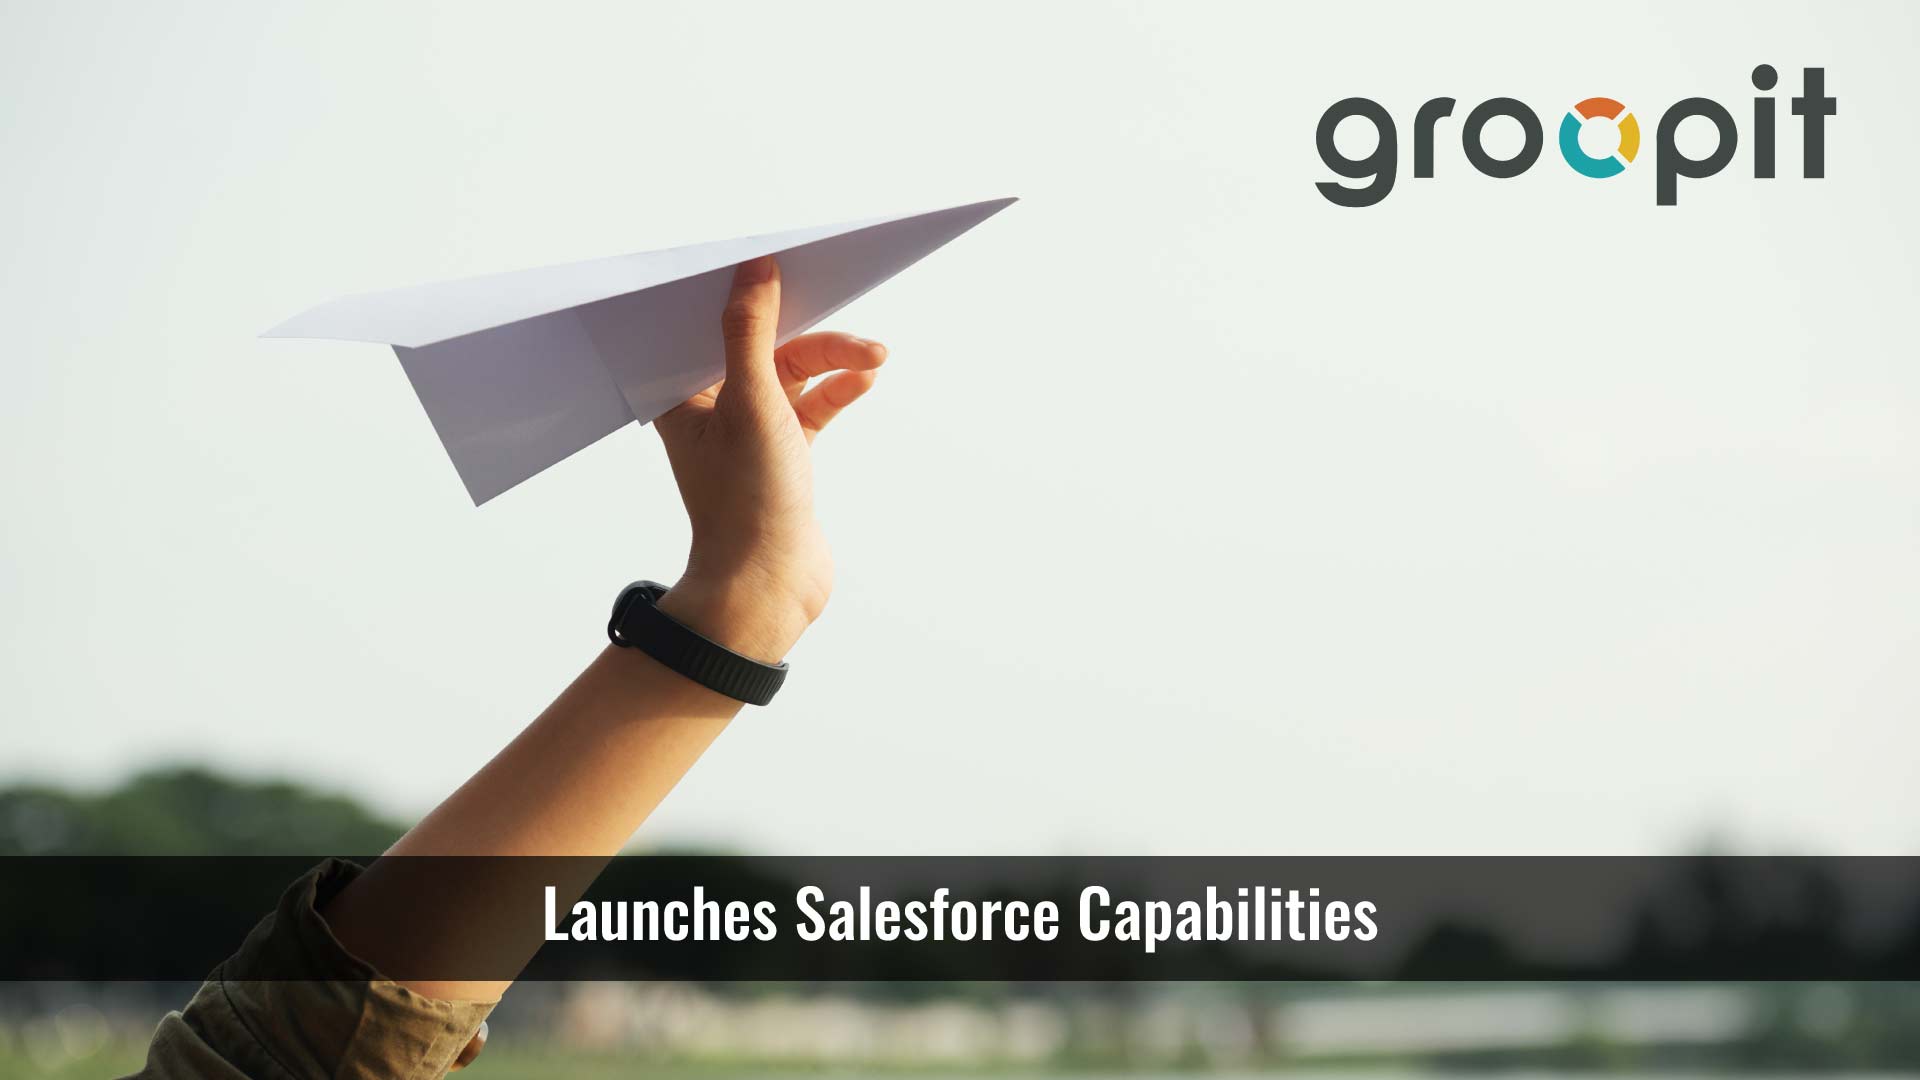 Groopit Launches Salesforce Capabilities to Deliver Insights Directly from Frontline Sellers to the Appropriate Business Decision-Makers